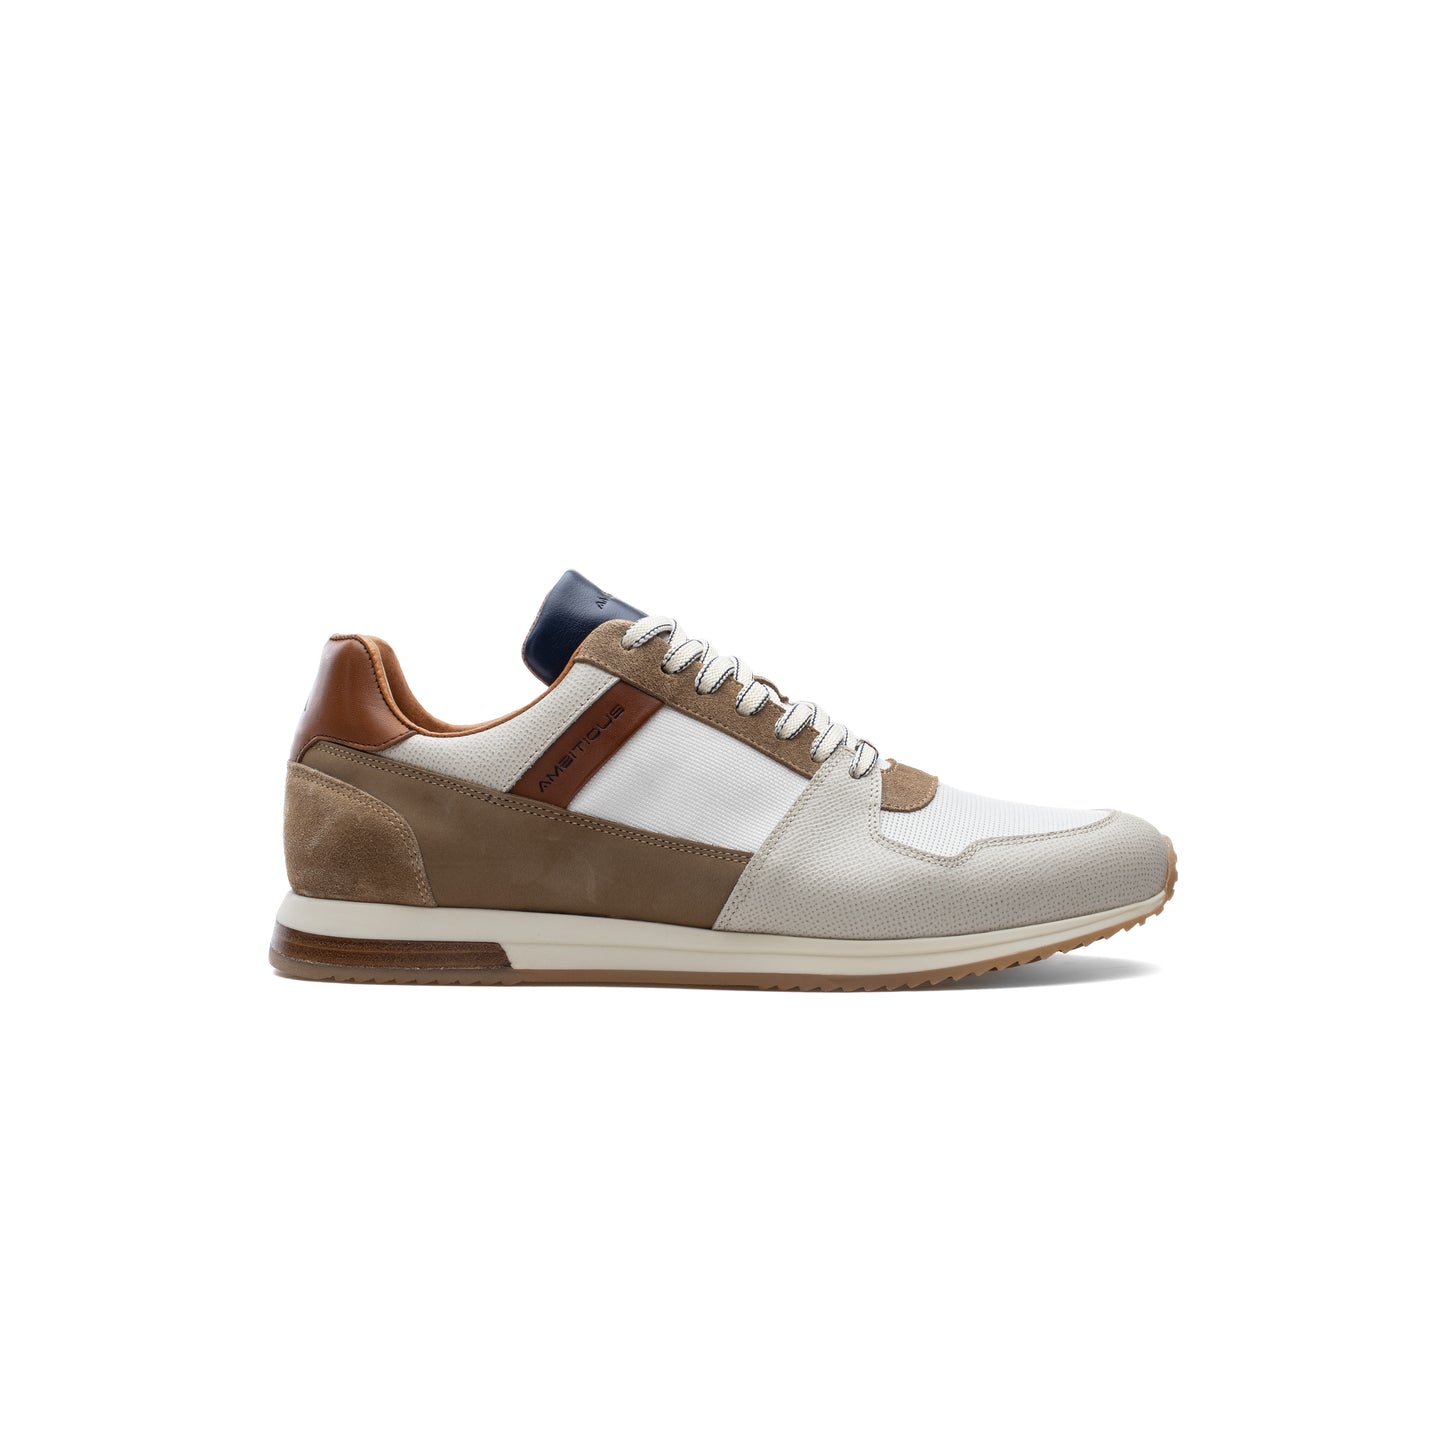 Ambitious 11240 11009 Grey / Off White / Camel Trainers